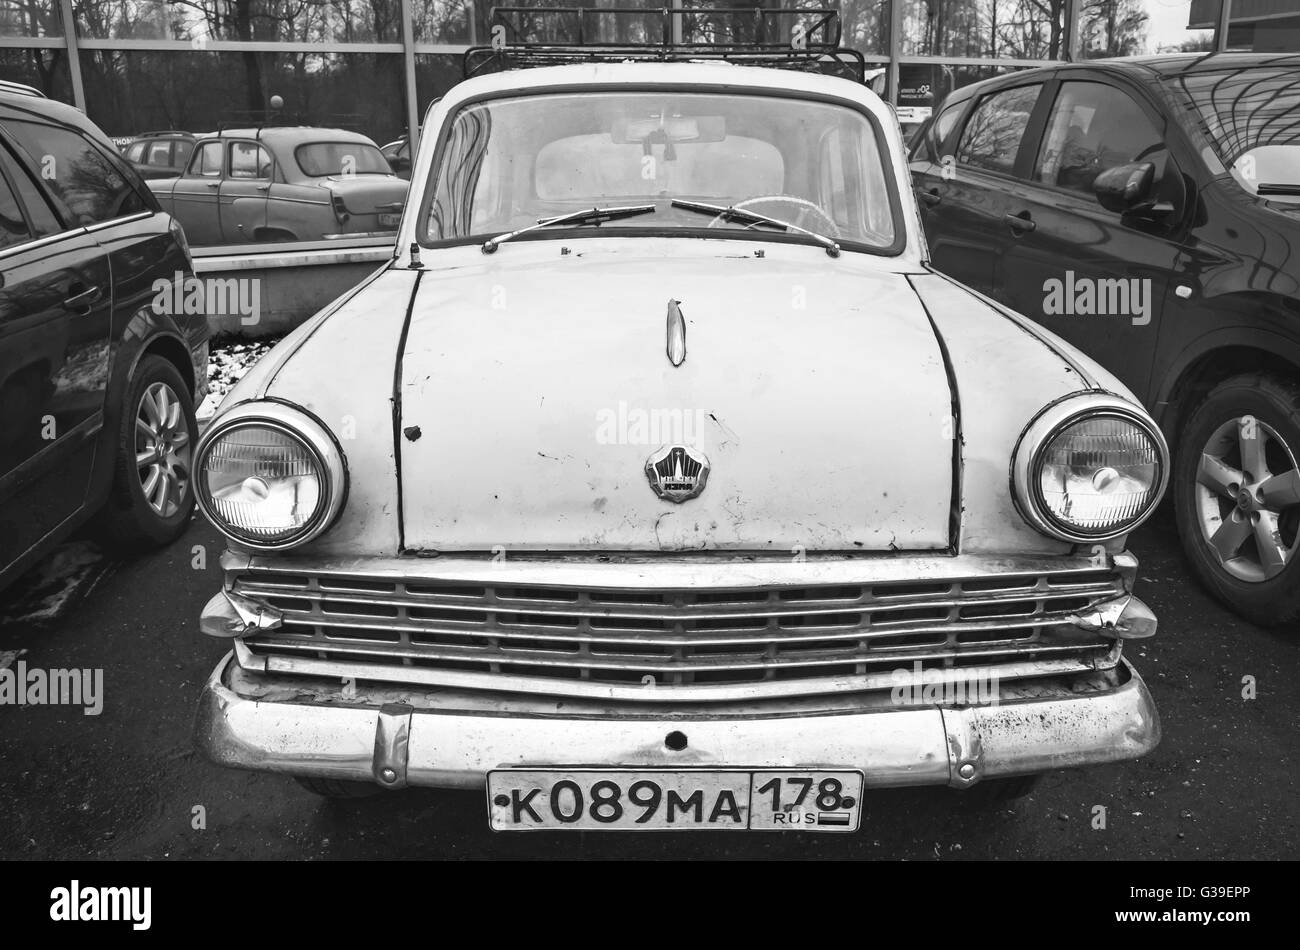 Saint-Petersburg, Russia - April 15, 2016: Old-timer Moskvitch-403 compact car manufactured by the former Soviet automobile make Stock Photo